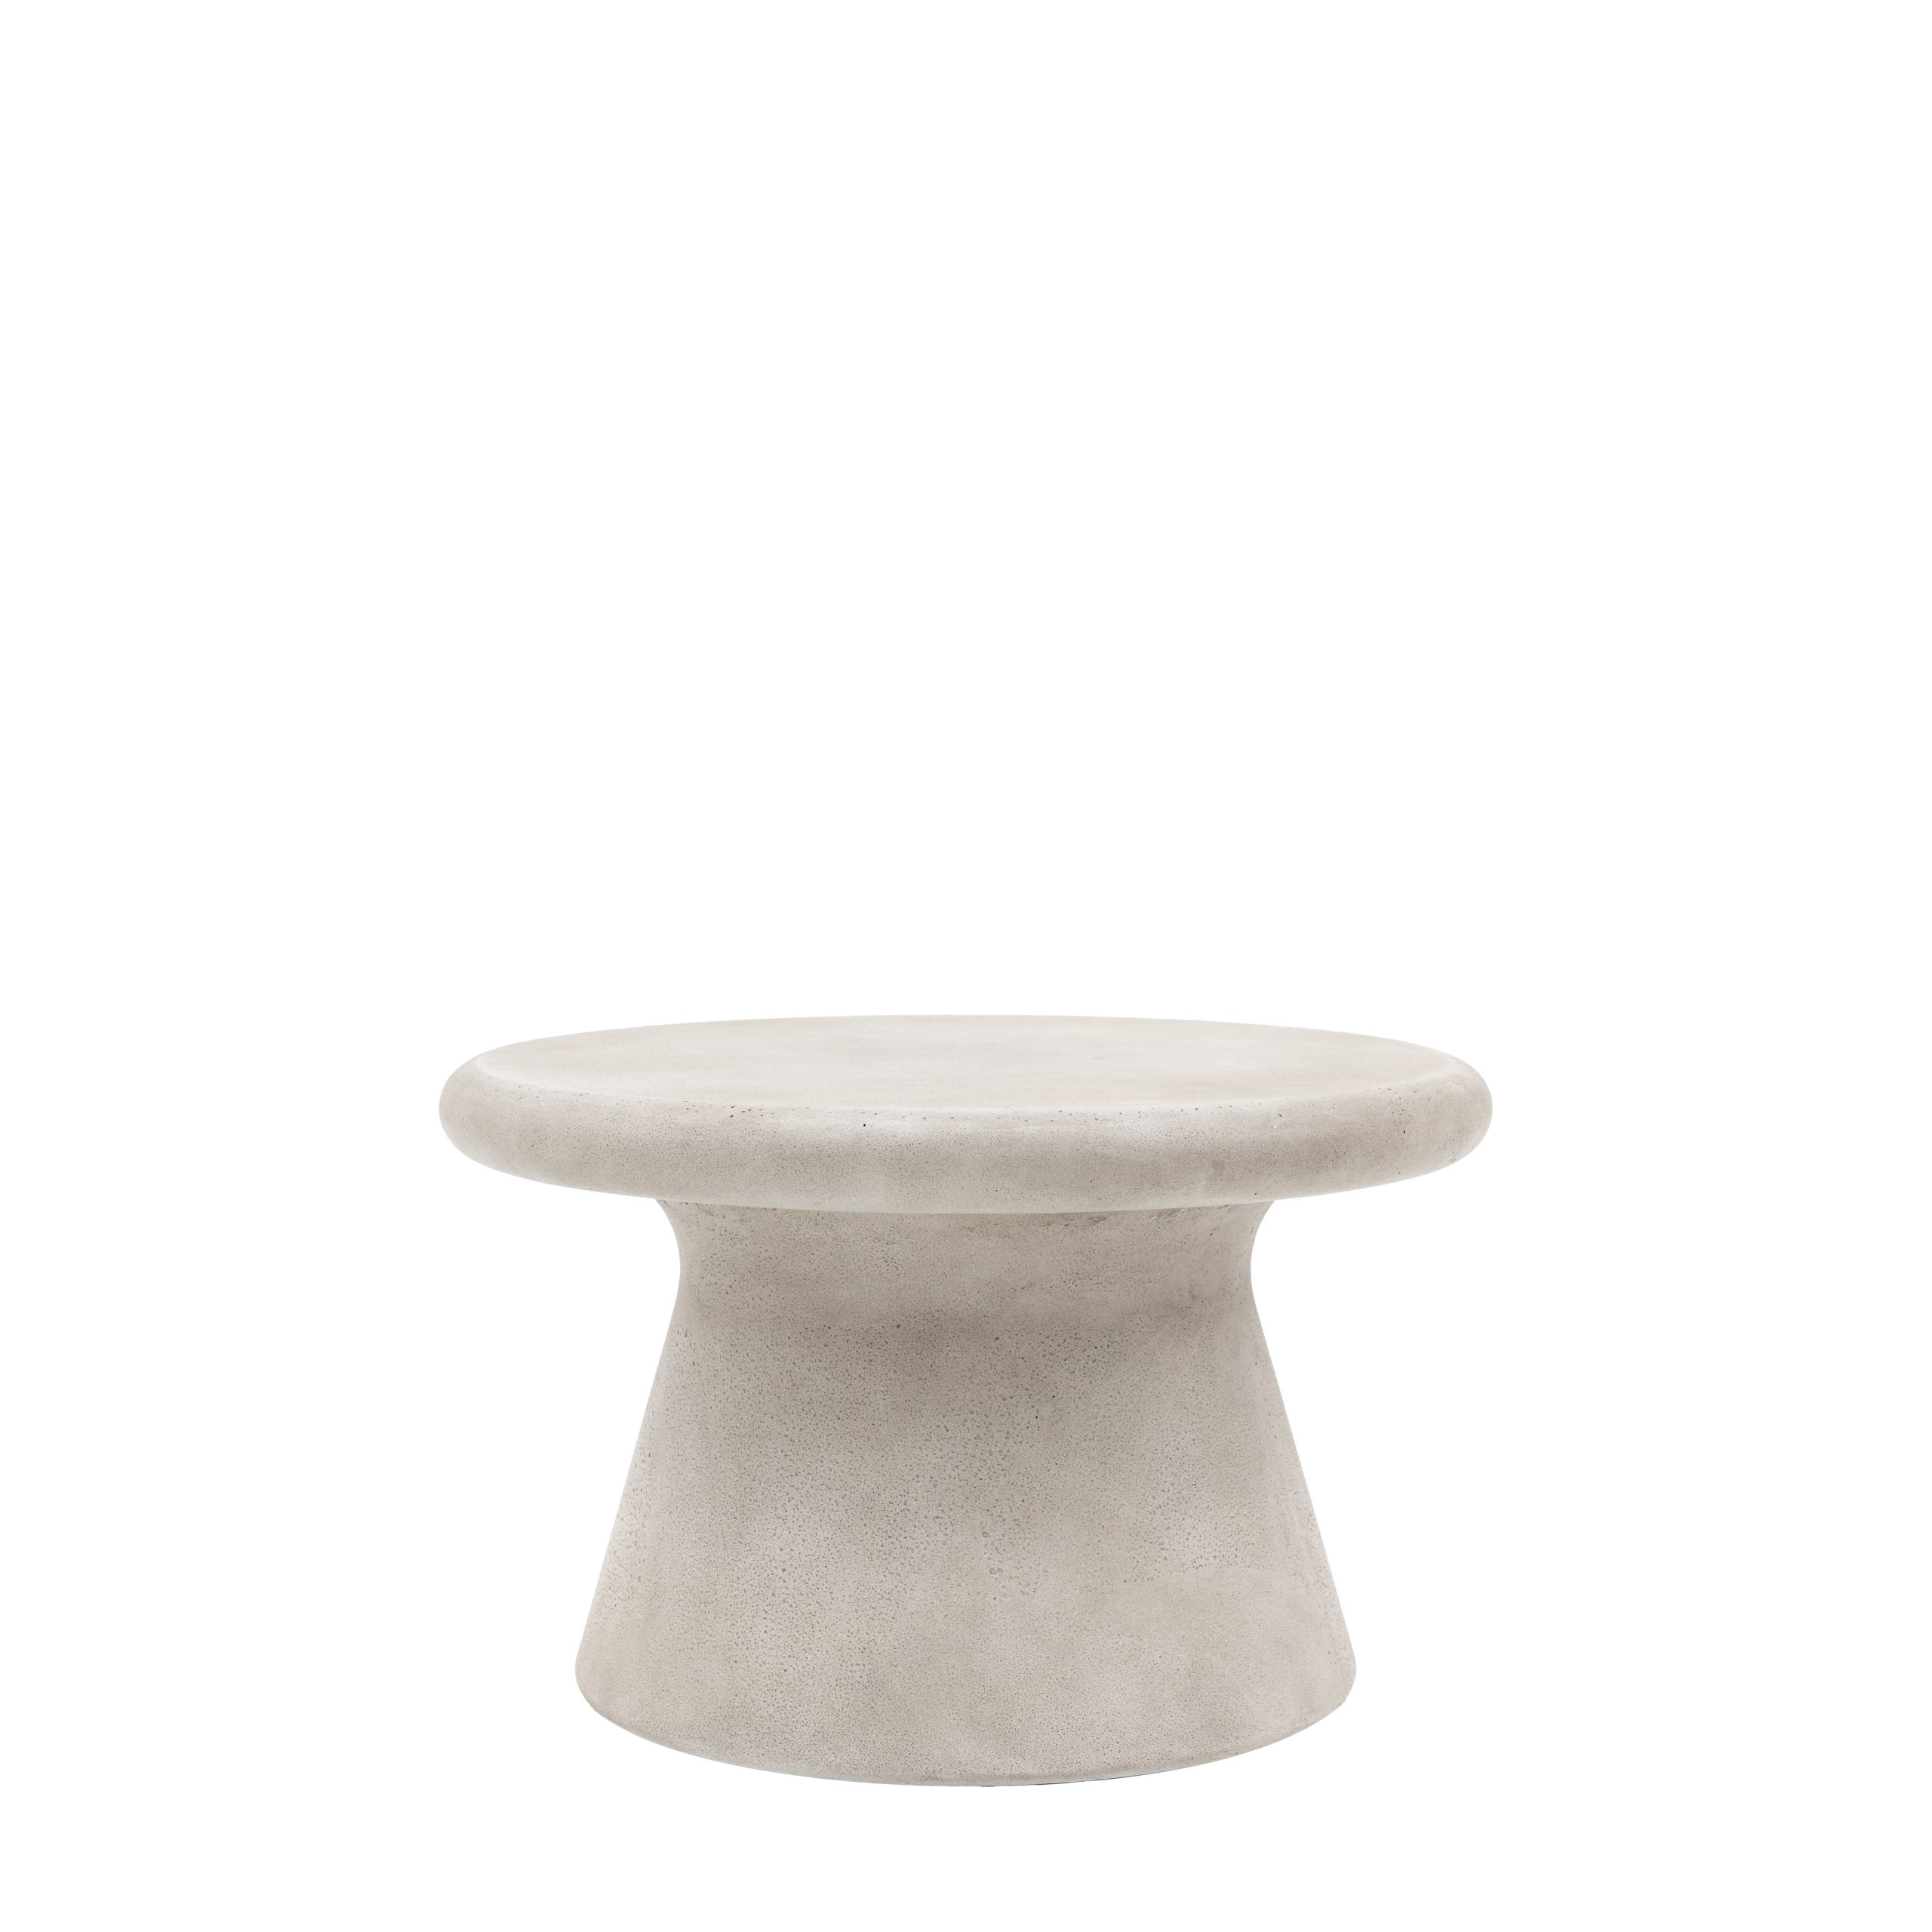 Gallery Direct Pavia Coffee Table Concrete